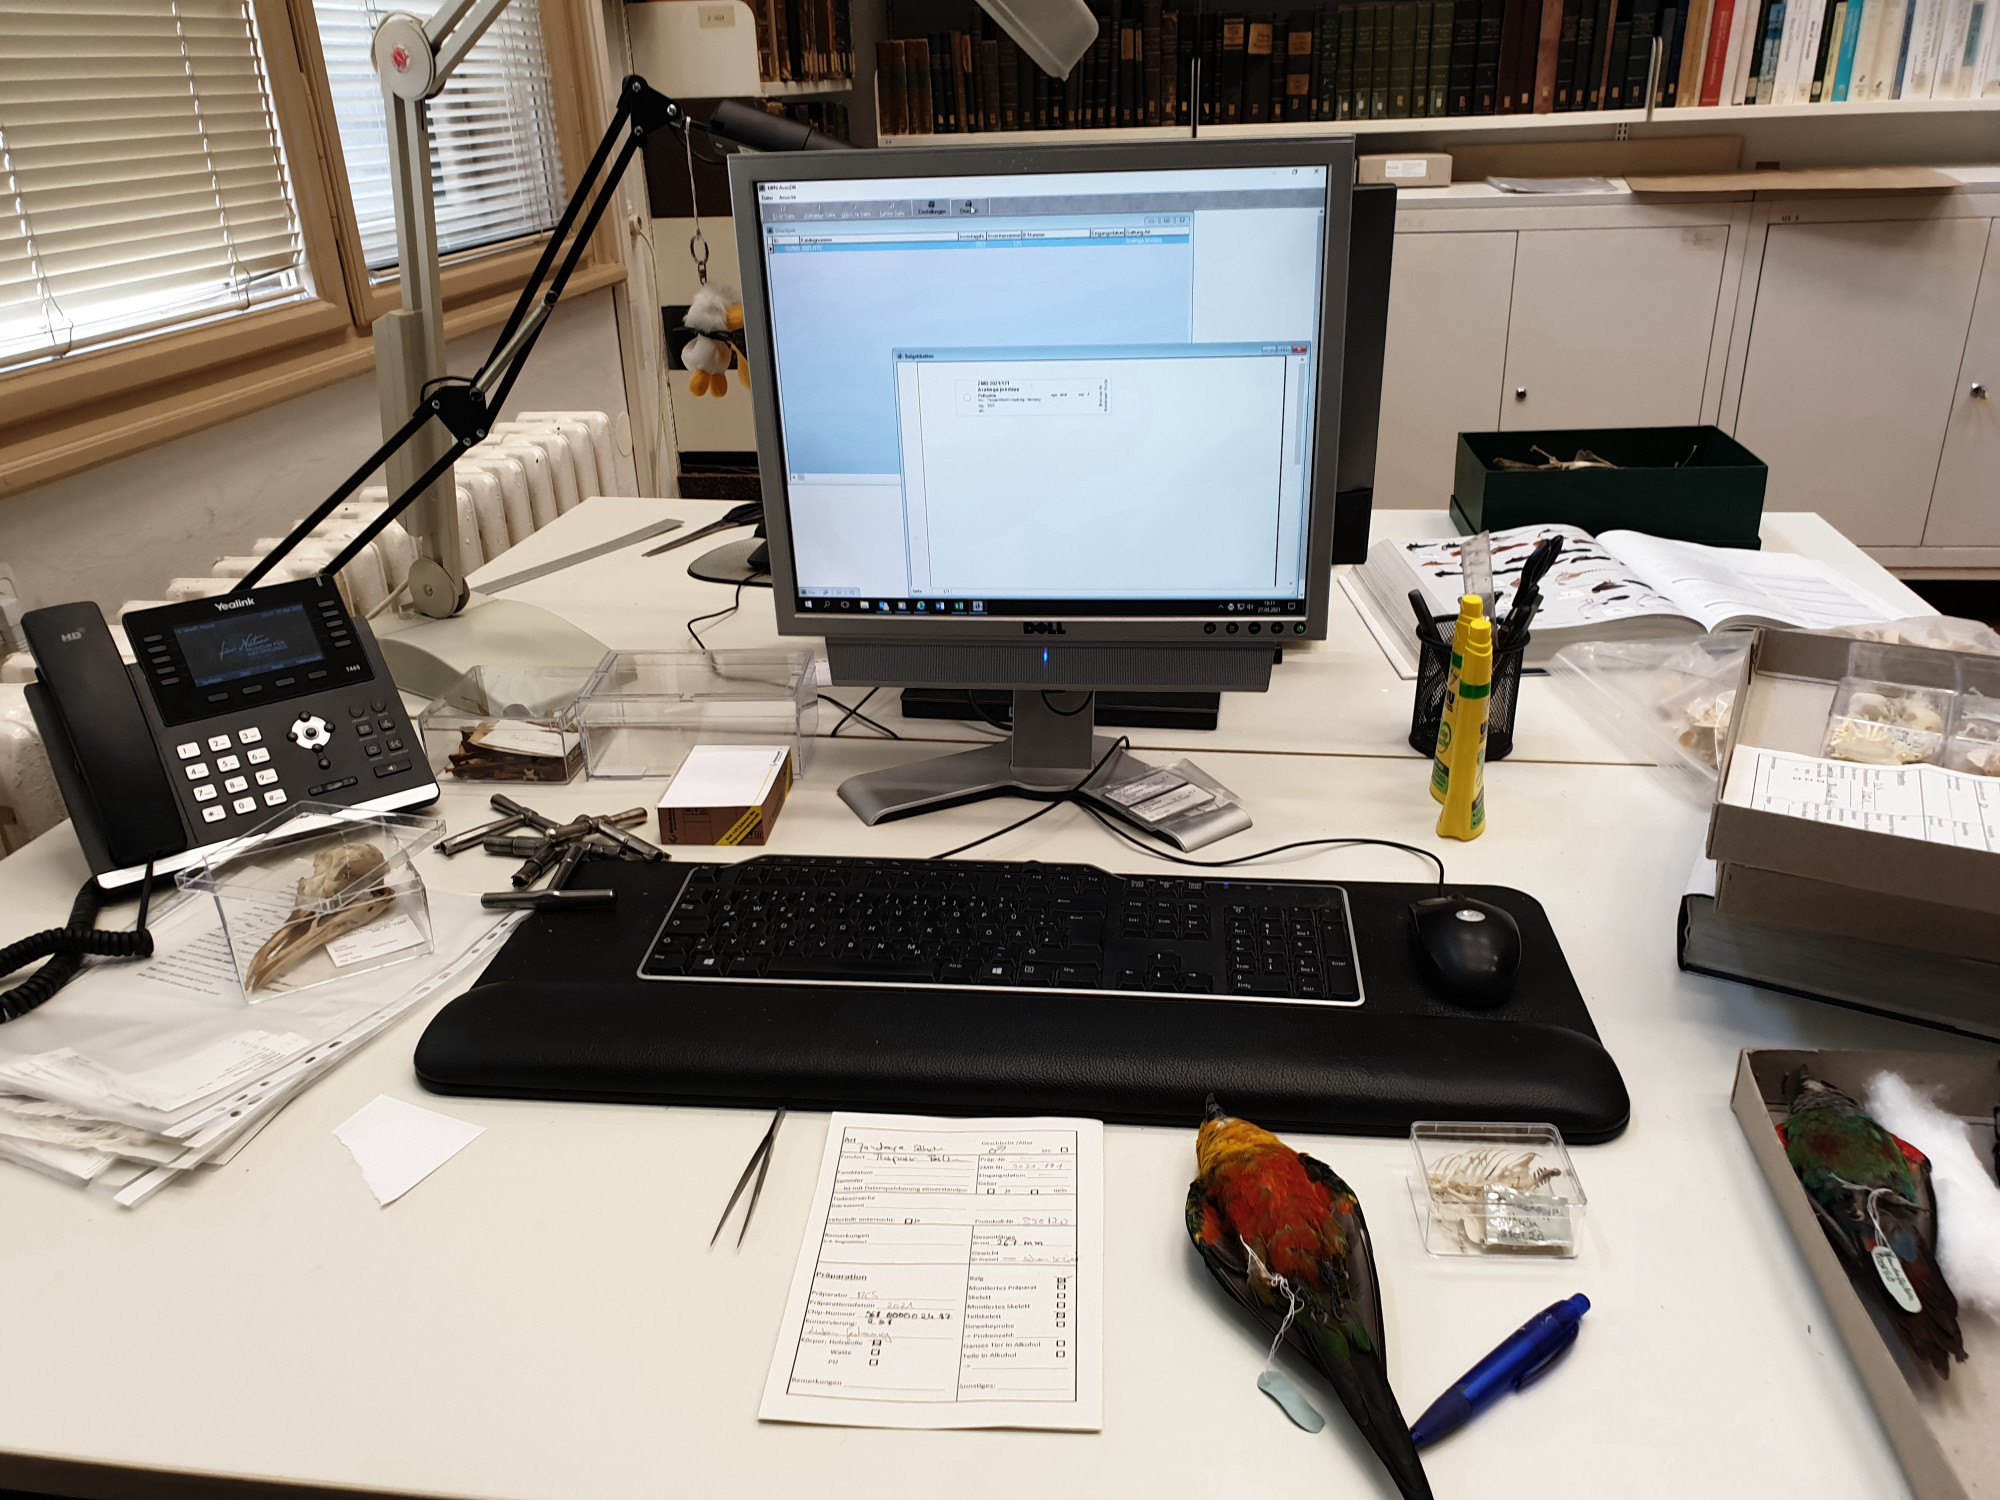 Photo of a desk in an office with a telephone on it and, in the middle of the image, a computer screen, which is turned on with various windows and programmes open. On the table in front of the keyboard is a colourfully feathered study skin with its wings folded and its legs tied together. To the right of it is a pen and a transparent bowl containing bone parts and an illegible label. To the left of the animal is a sheet of paper with writing on it and a pair of tweezers.